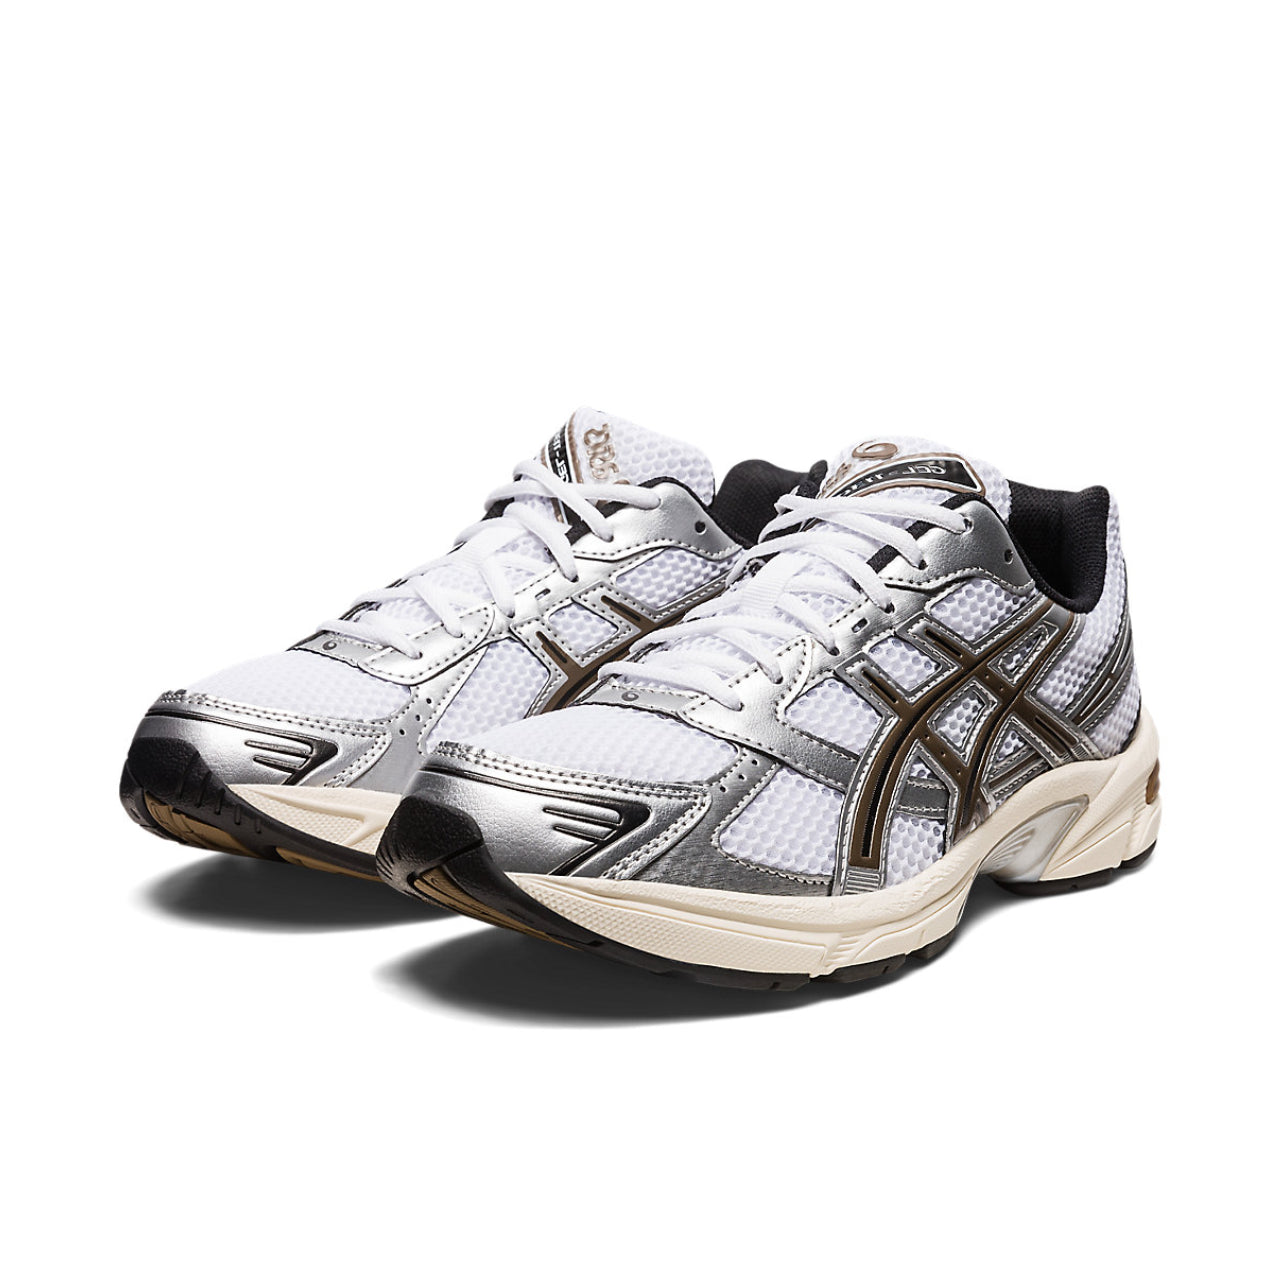 ASICS Gel-1130 White Clay Canyon - 1201A256-113 - medial